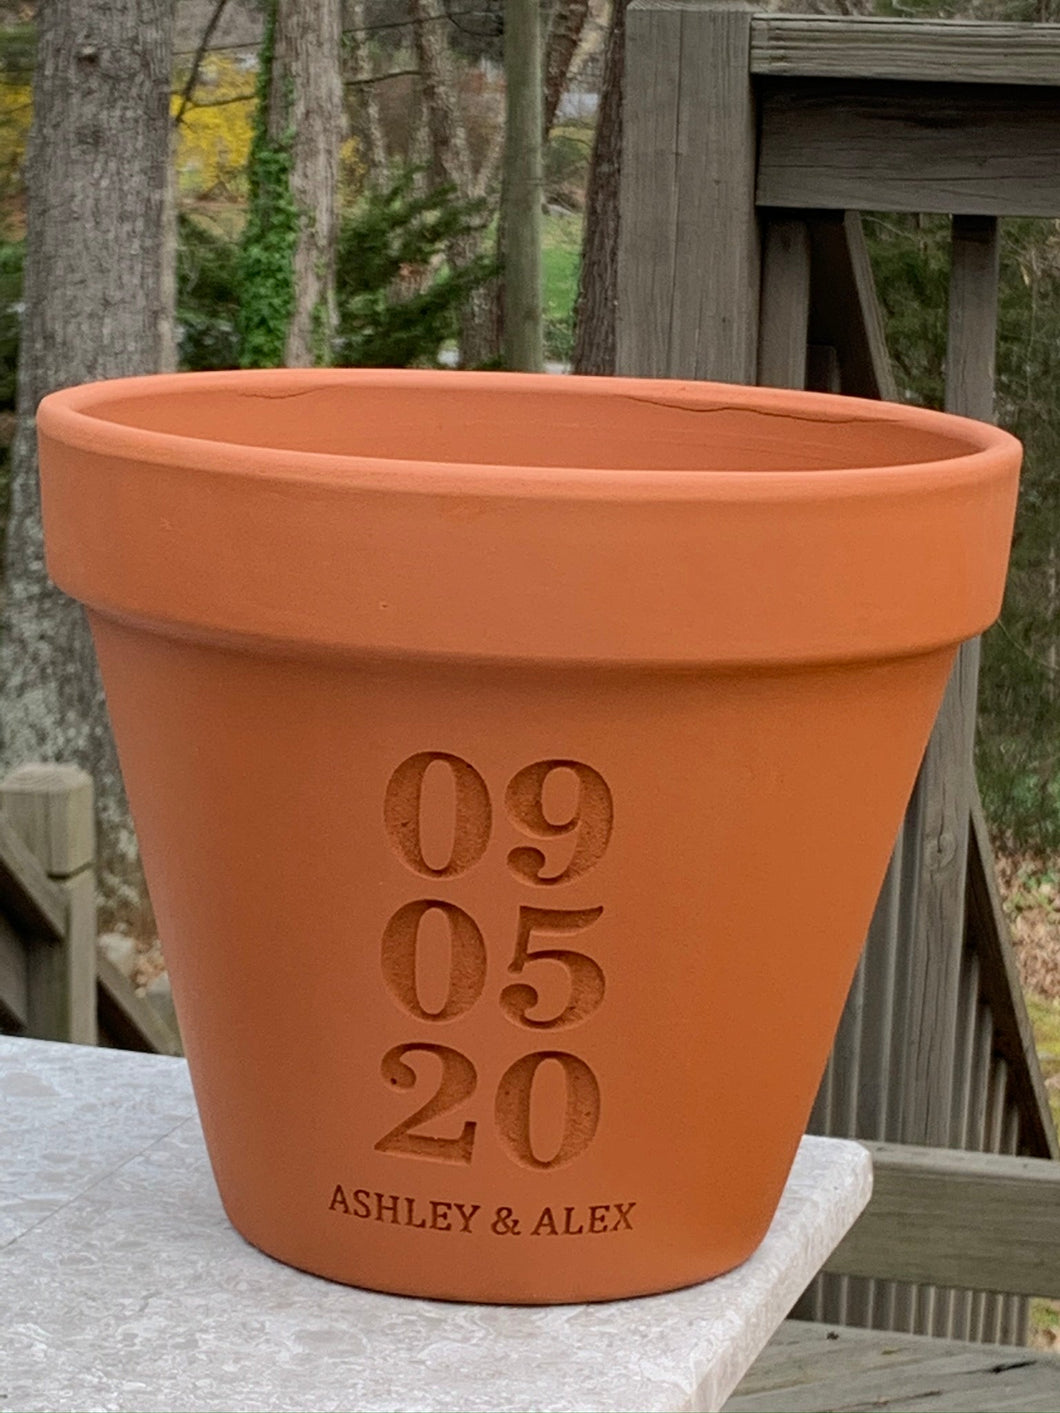 Stacked Date | Deep Etched Custom Carved Clay Flower Pot | Engraved Flowerpot | Terra cotta Planter | White Granite Marble, Red, or Basalt Clay